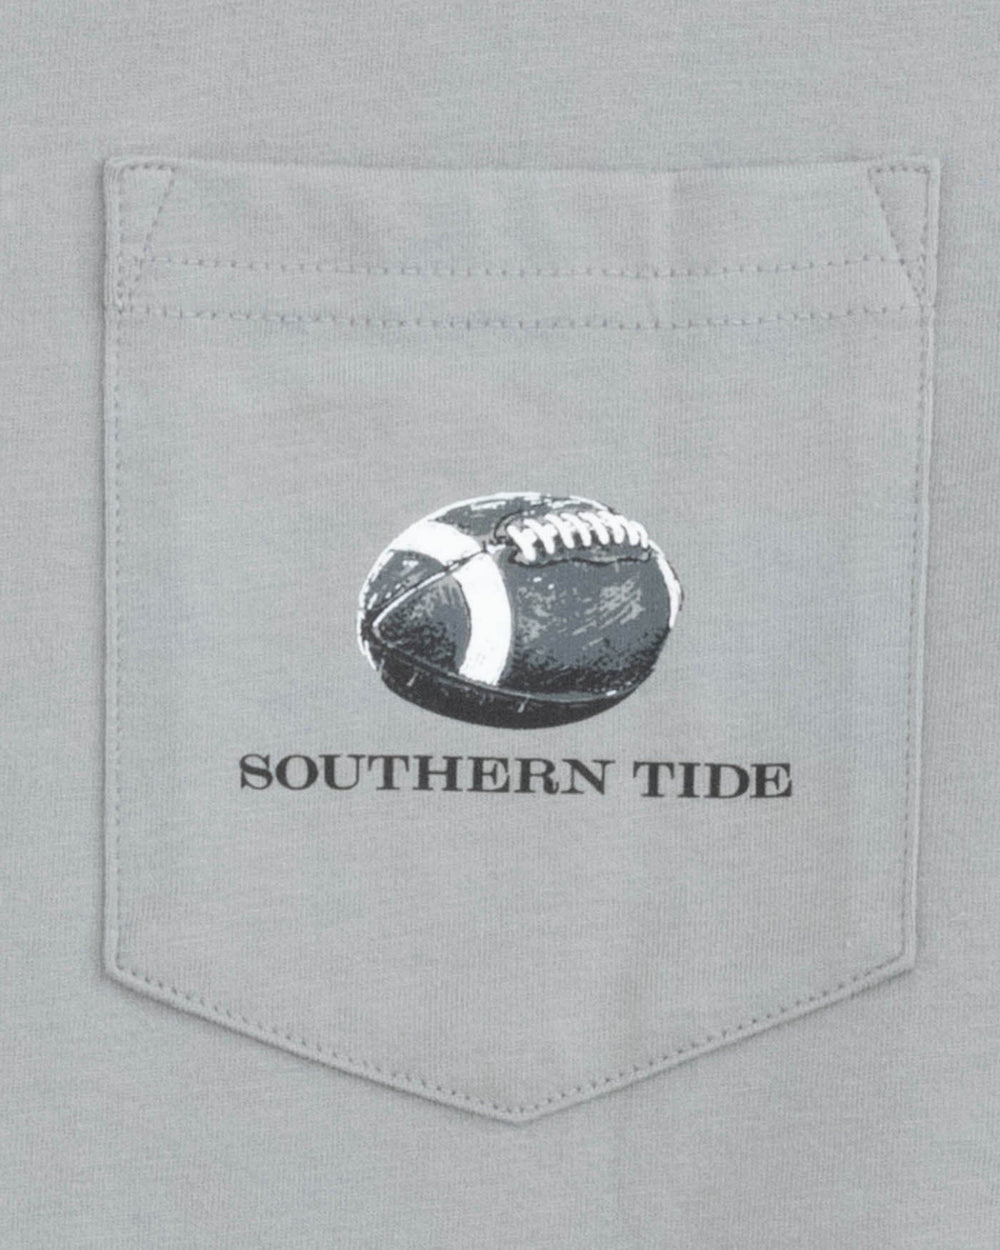 The detail view of the Southern Tide brrr-eeze Heather Performance Polo Shirt by Southern Tide - Ultimate Grey